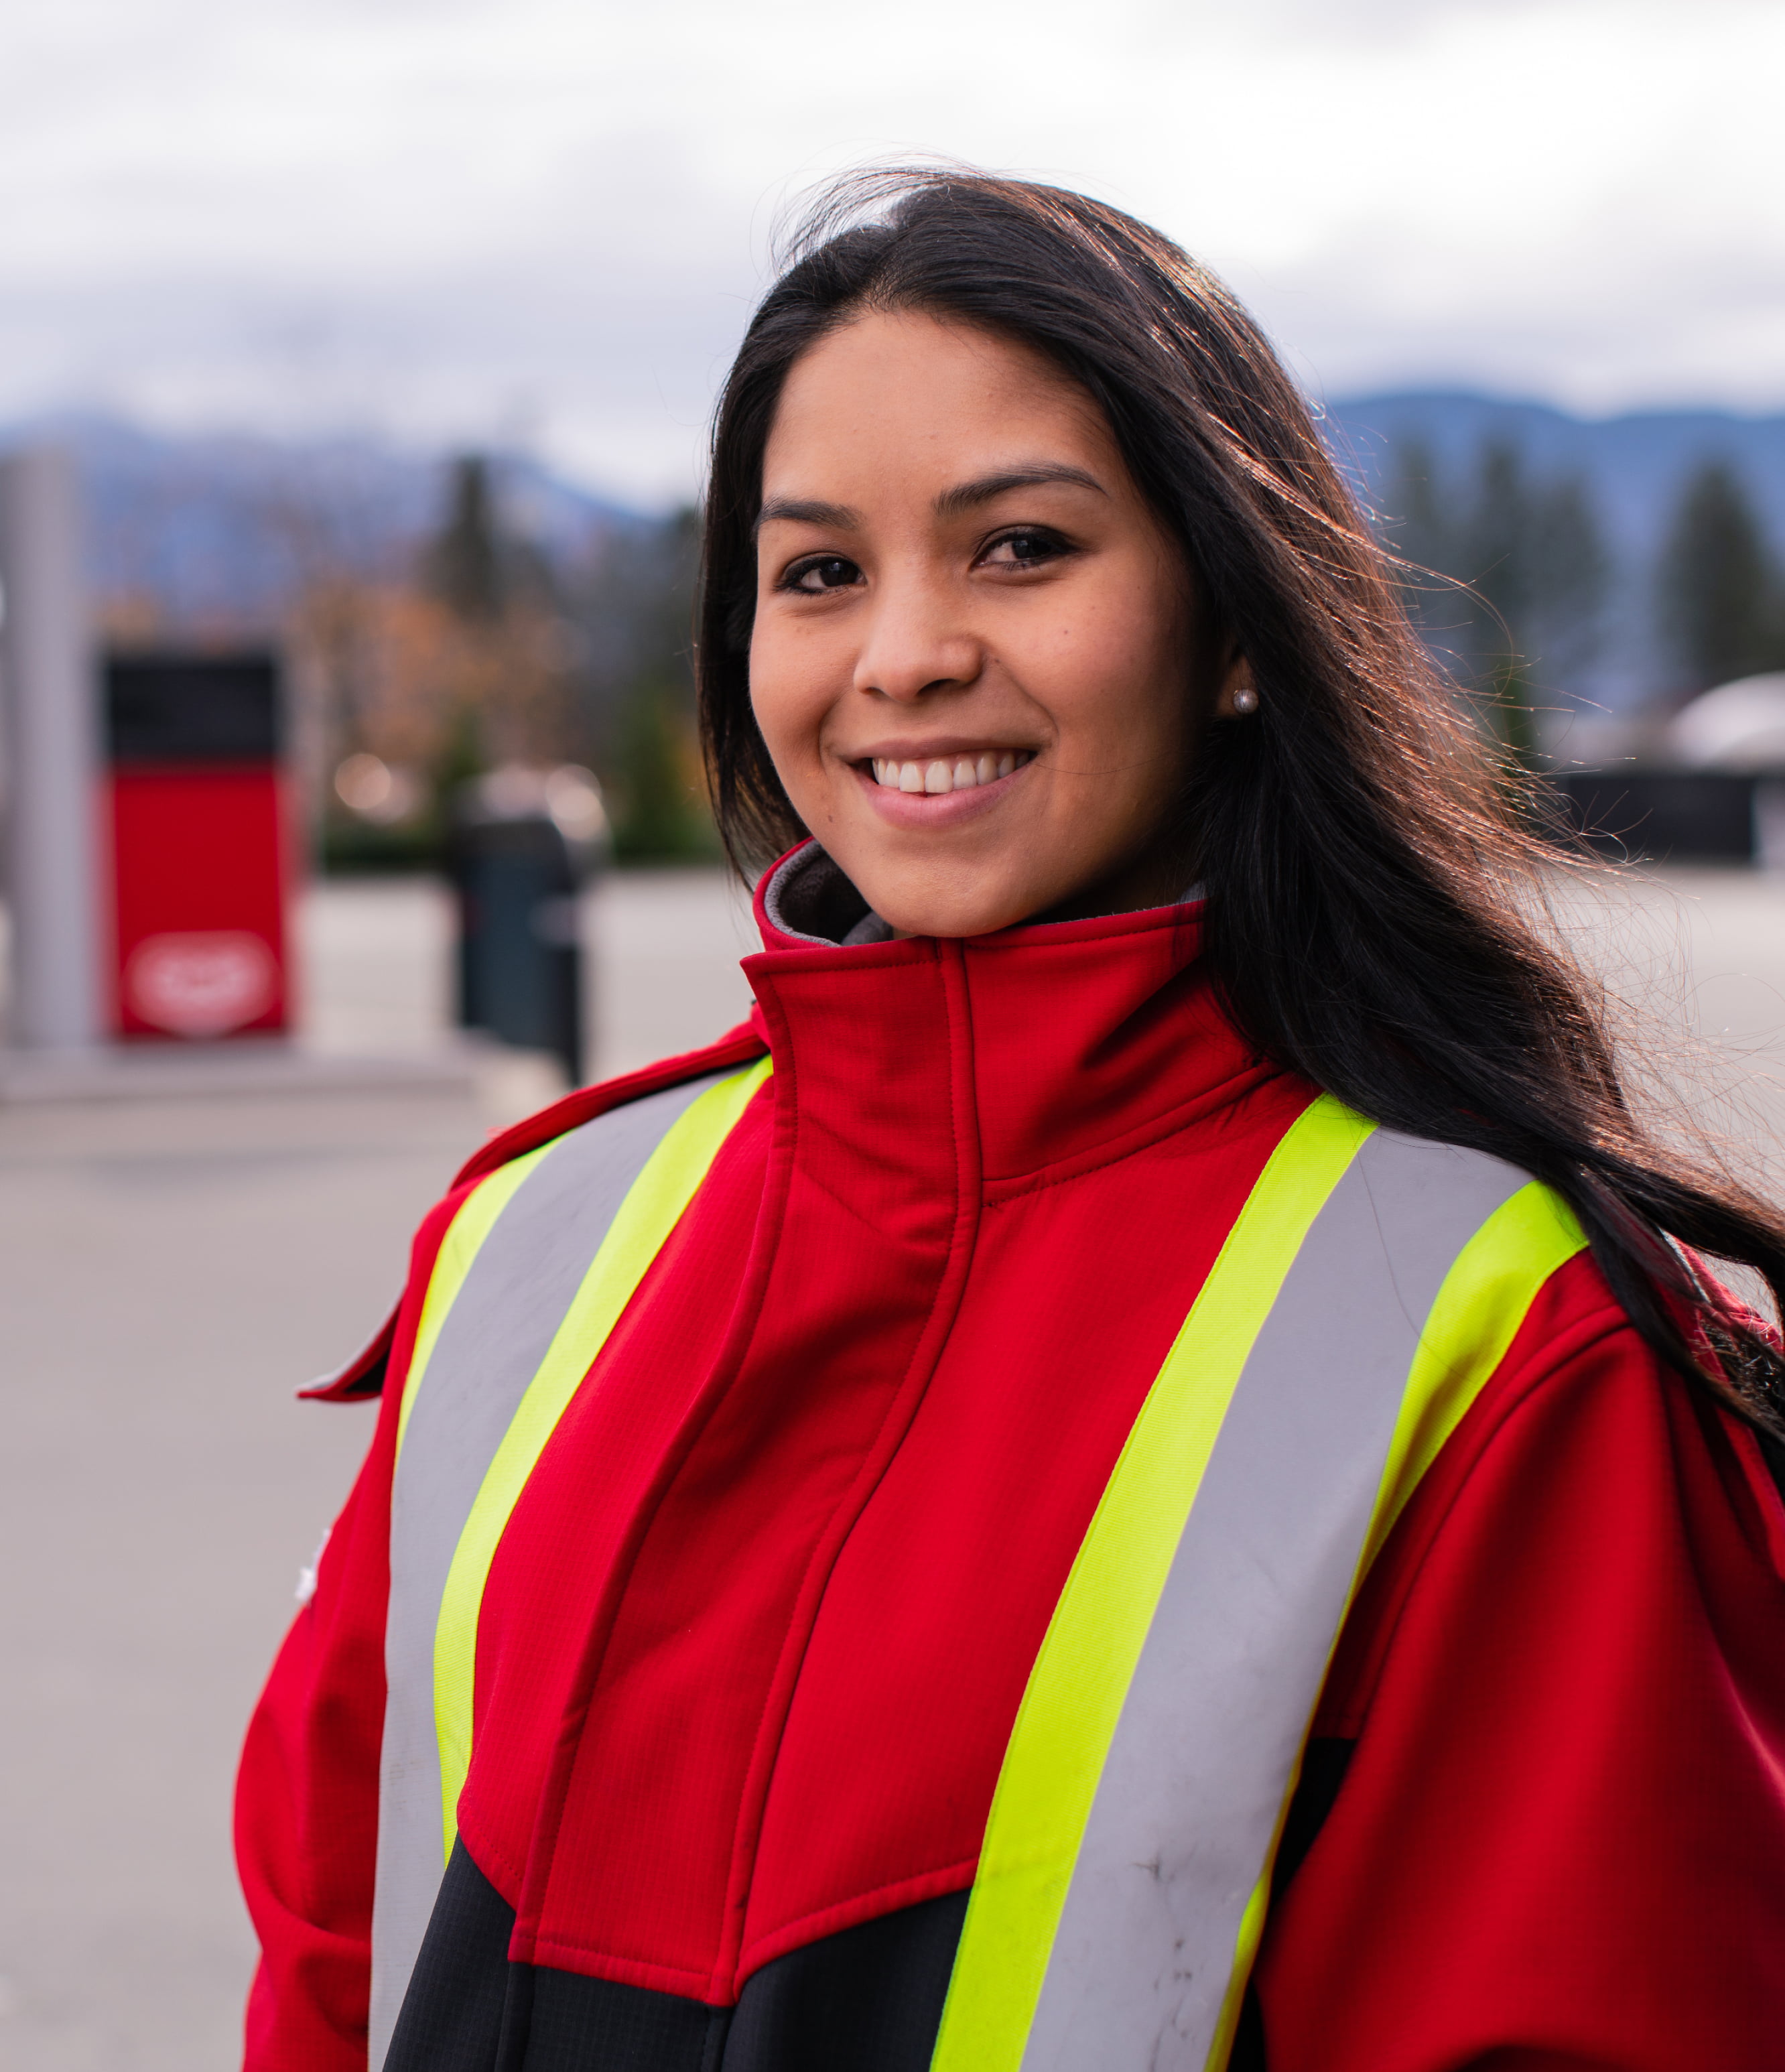 Woman outside of a Co-op gas station wearing a red jacket and safety vest, smiling at the camera.